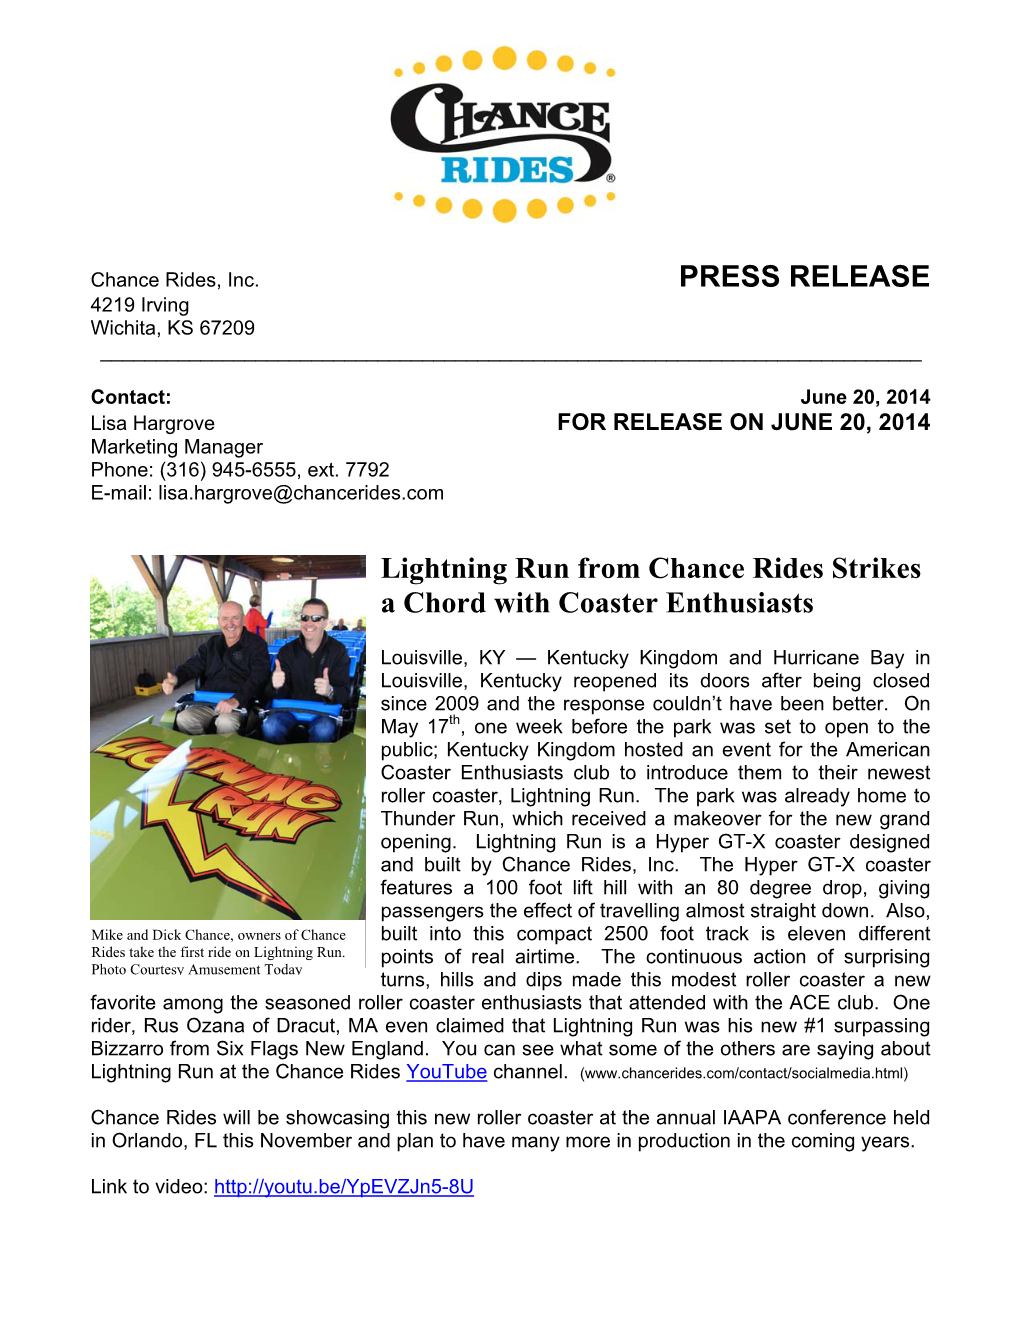 PRESS RELEASE Lightning Run from Chance Rides Strikes a Chord With